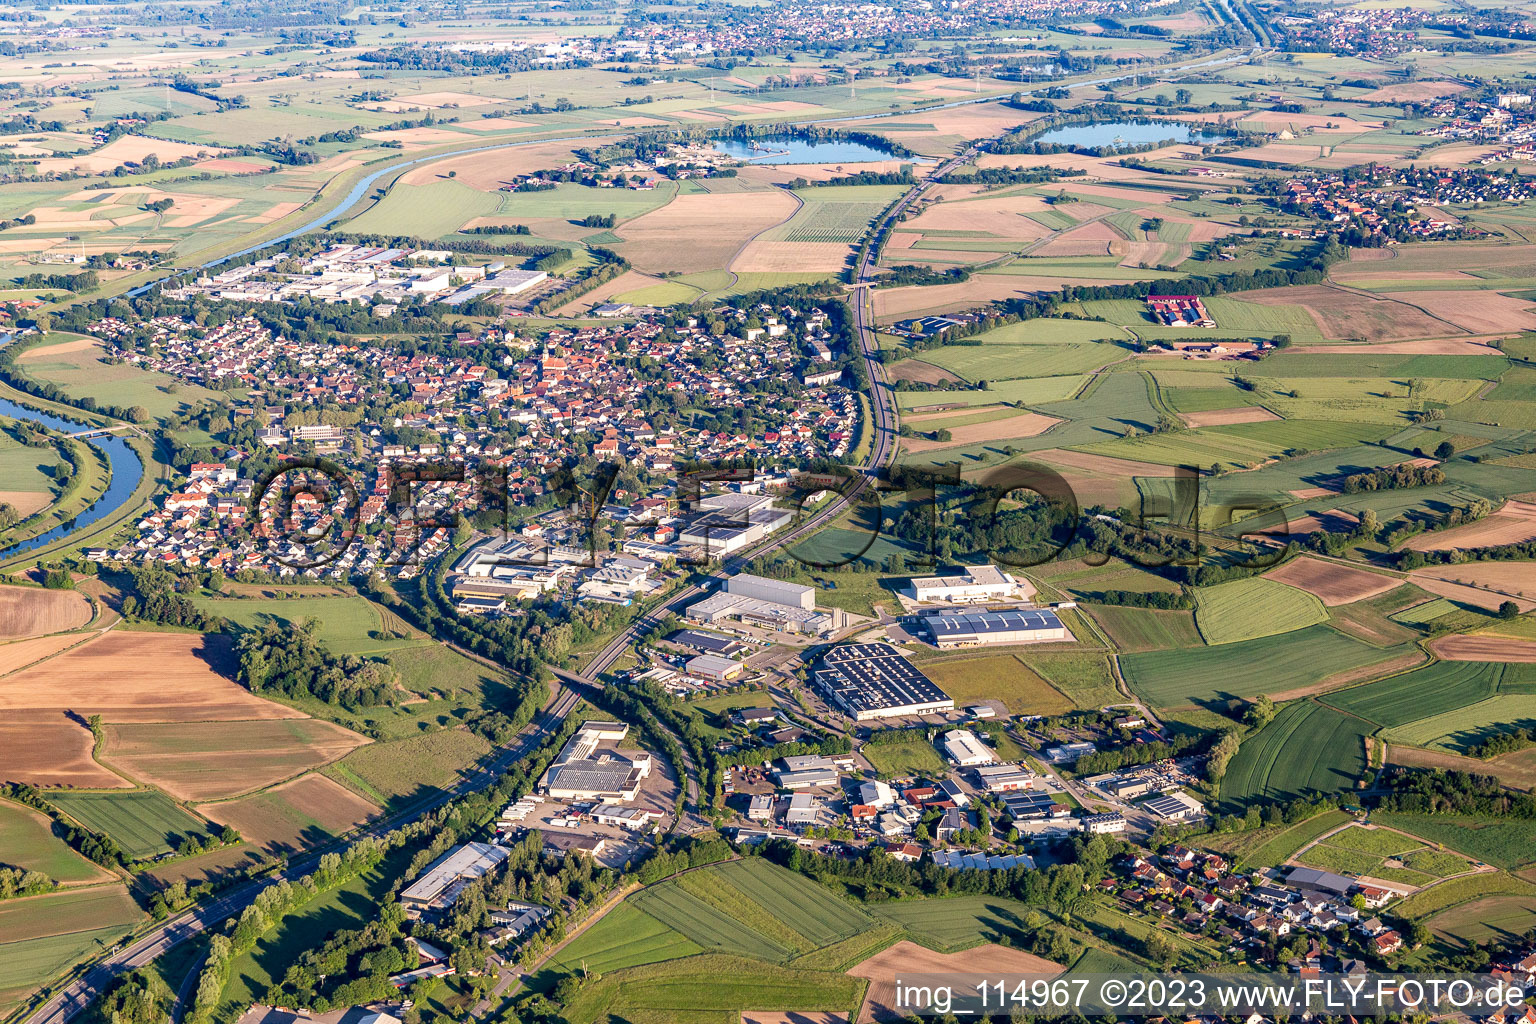 Aerial view of Village on the banks of the area of the Kinzig river - river course in Willstaett in the state Baden-Wurttemberg, Germany